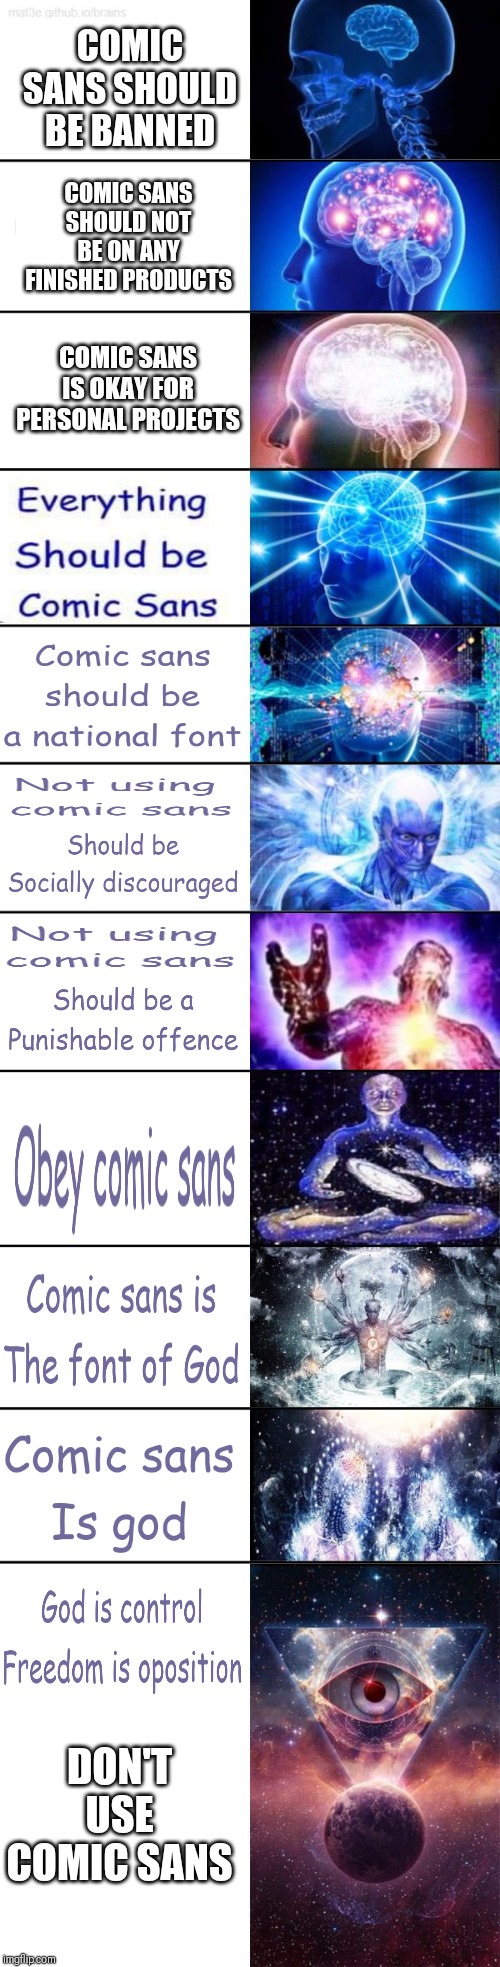 Big Brain Meme | COMIC SANS SHOULD BE BANNED; COMIC SANS SHOULD NOT BE ON ANY FINISHED PRODUCTS; COMIC SANS IS OKAY FOR PERSONAL PROJECTS; DON'T USE COMIC SANS | image tagged in big brain meme | made w/ Imgflip meme maker